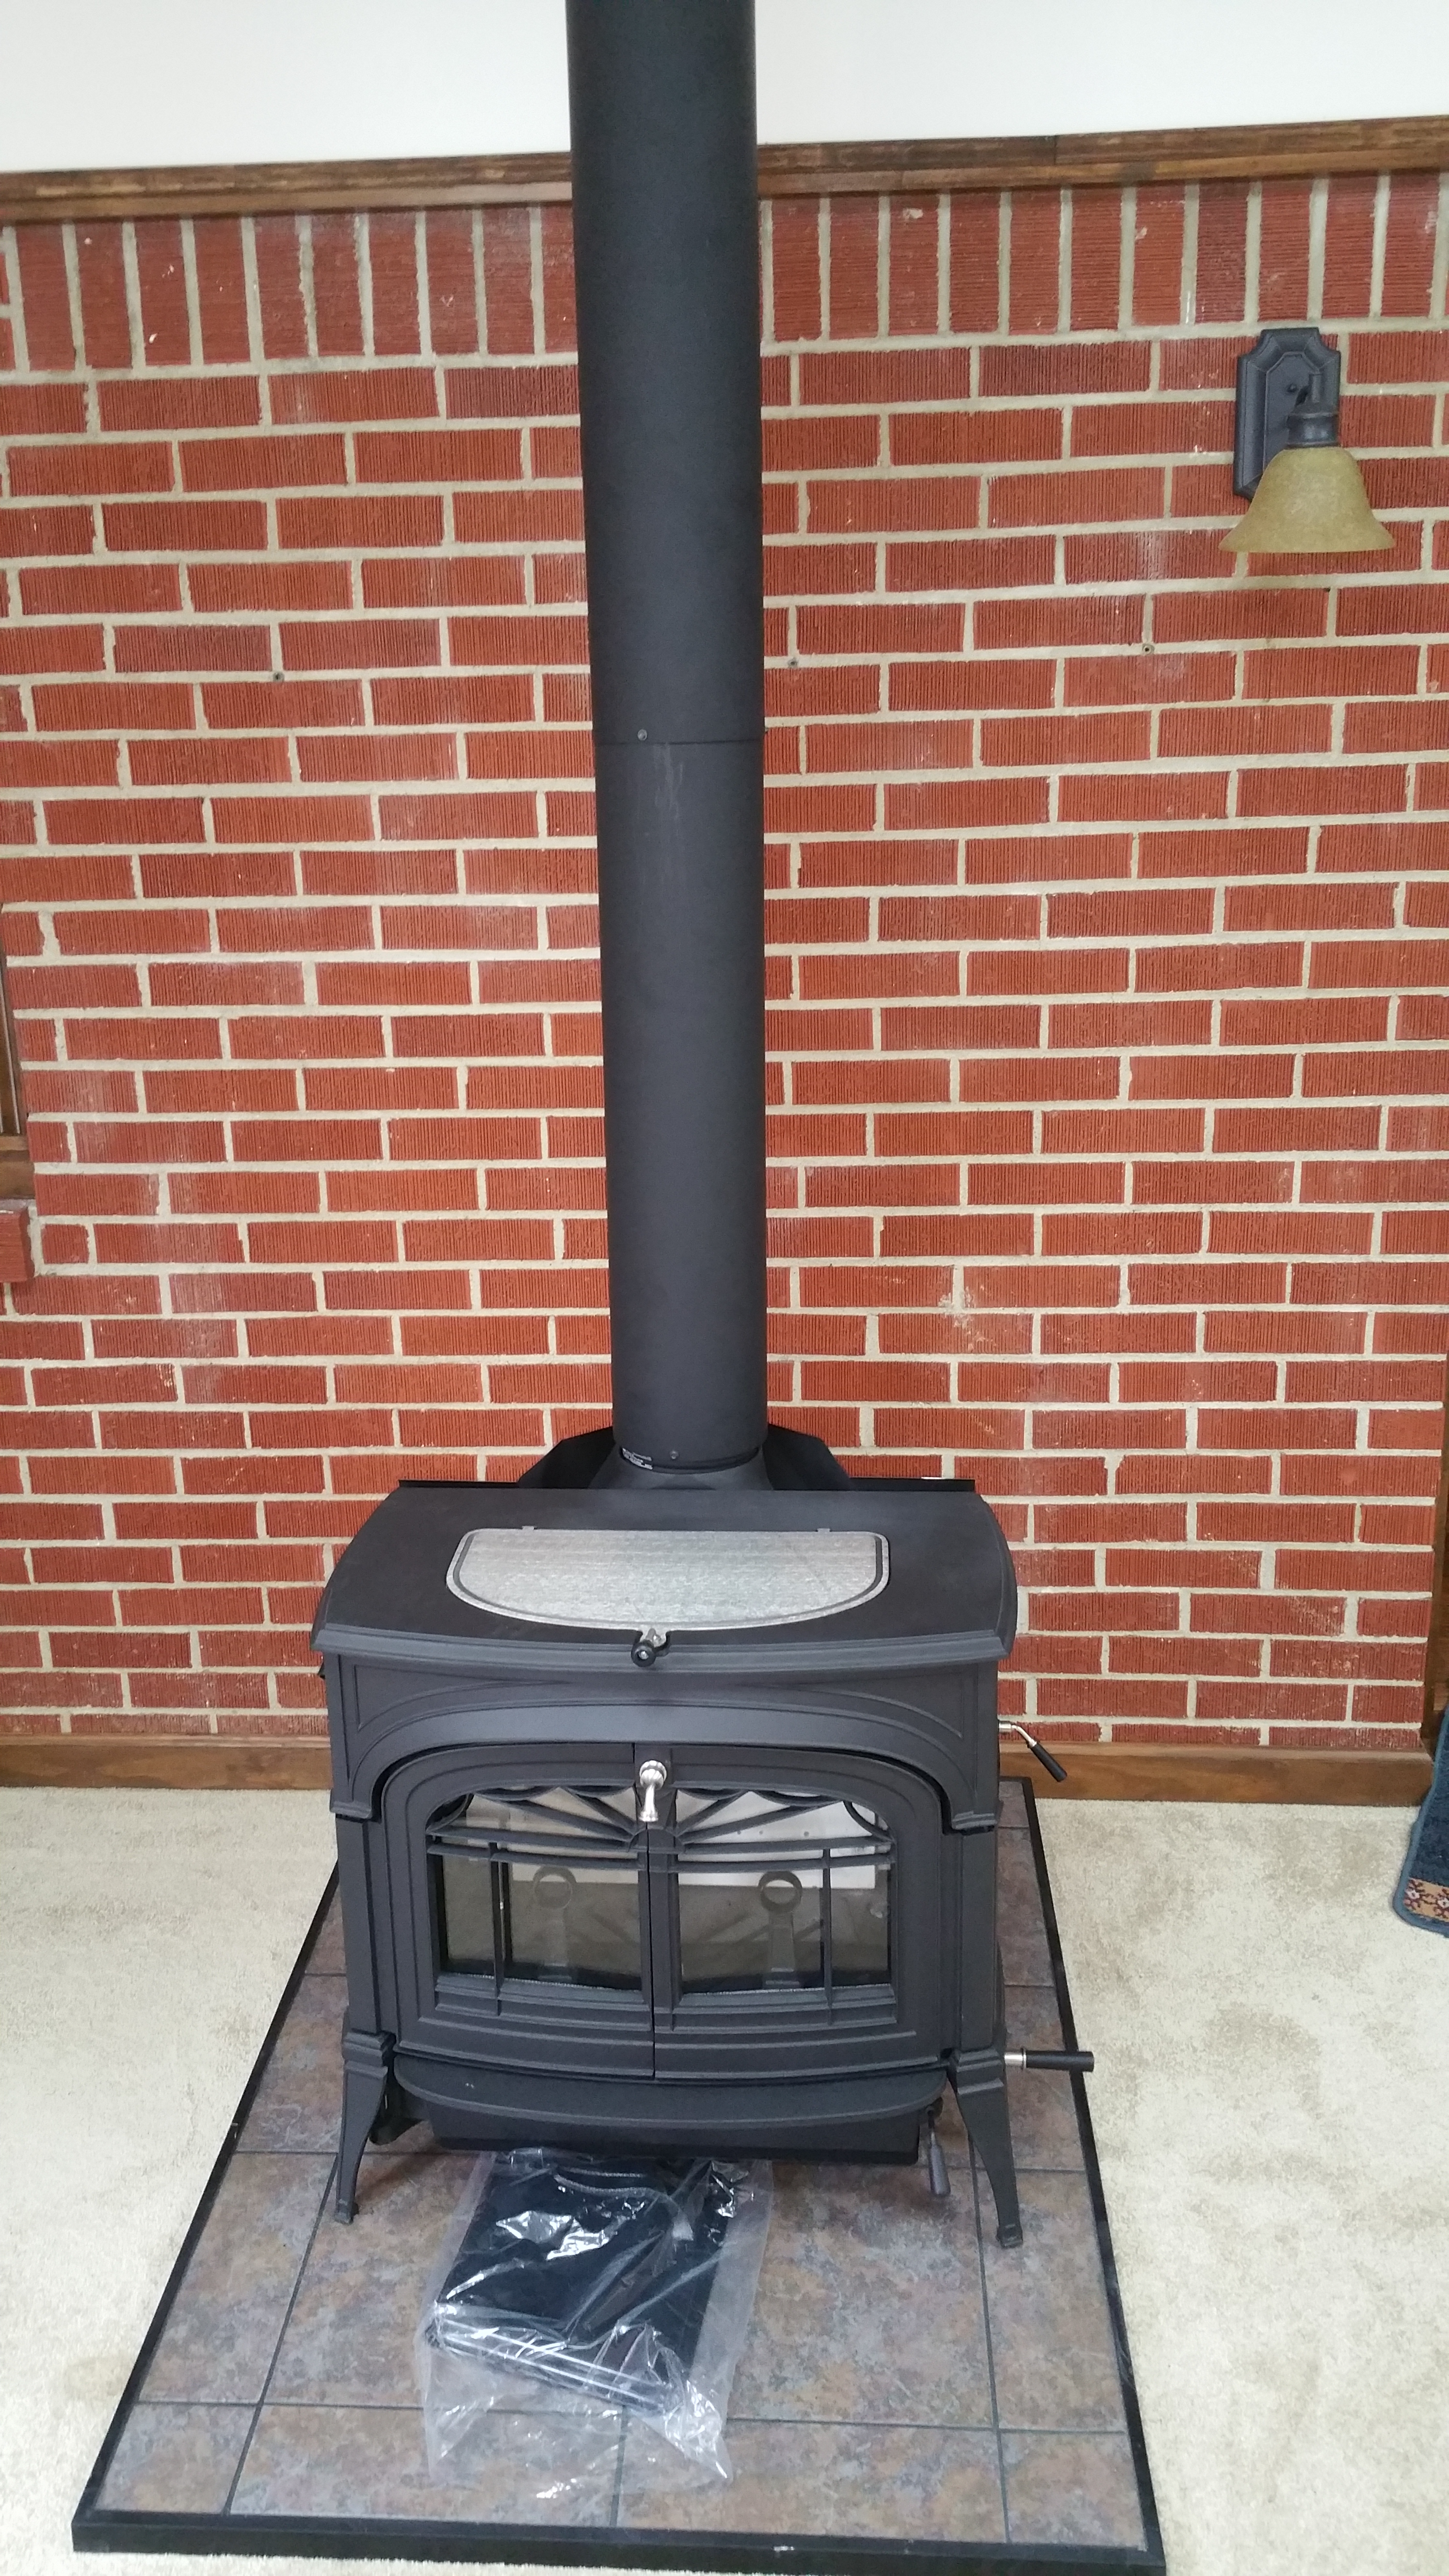 We installed the hearth stove and flue system in this photo